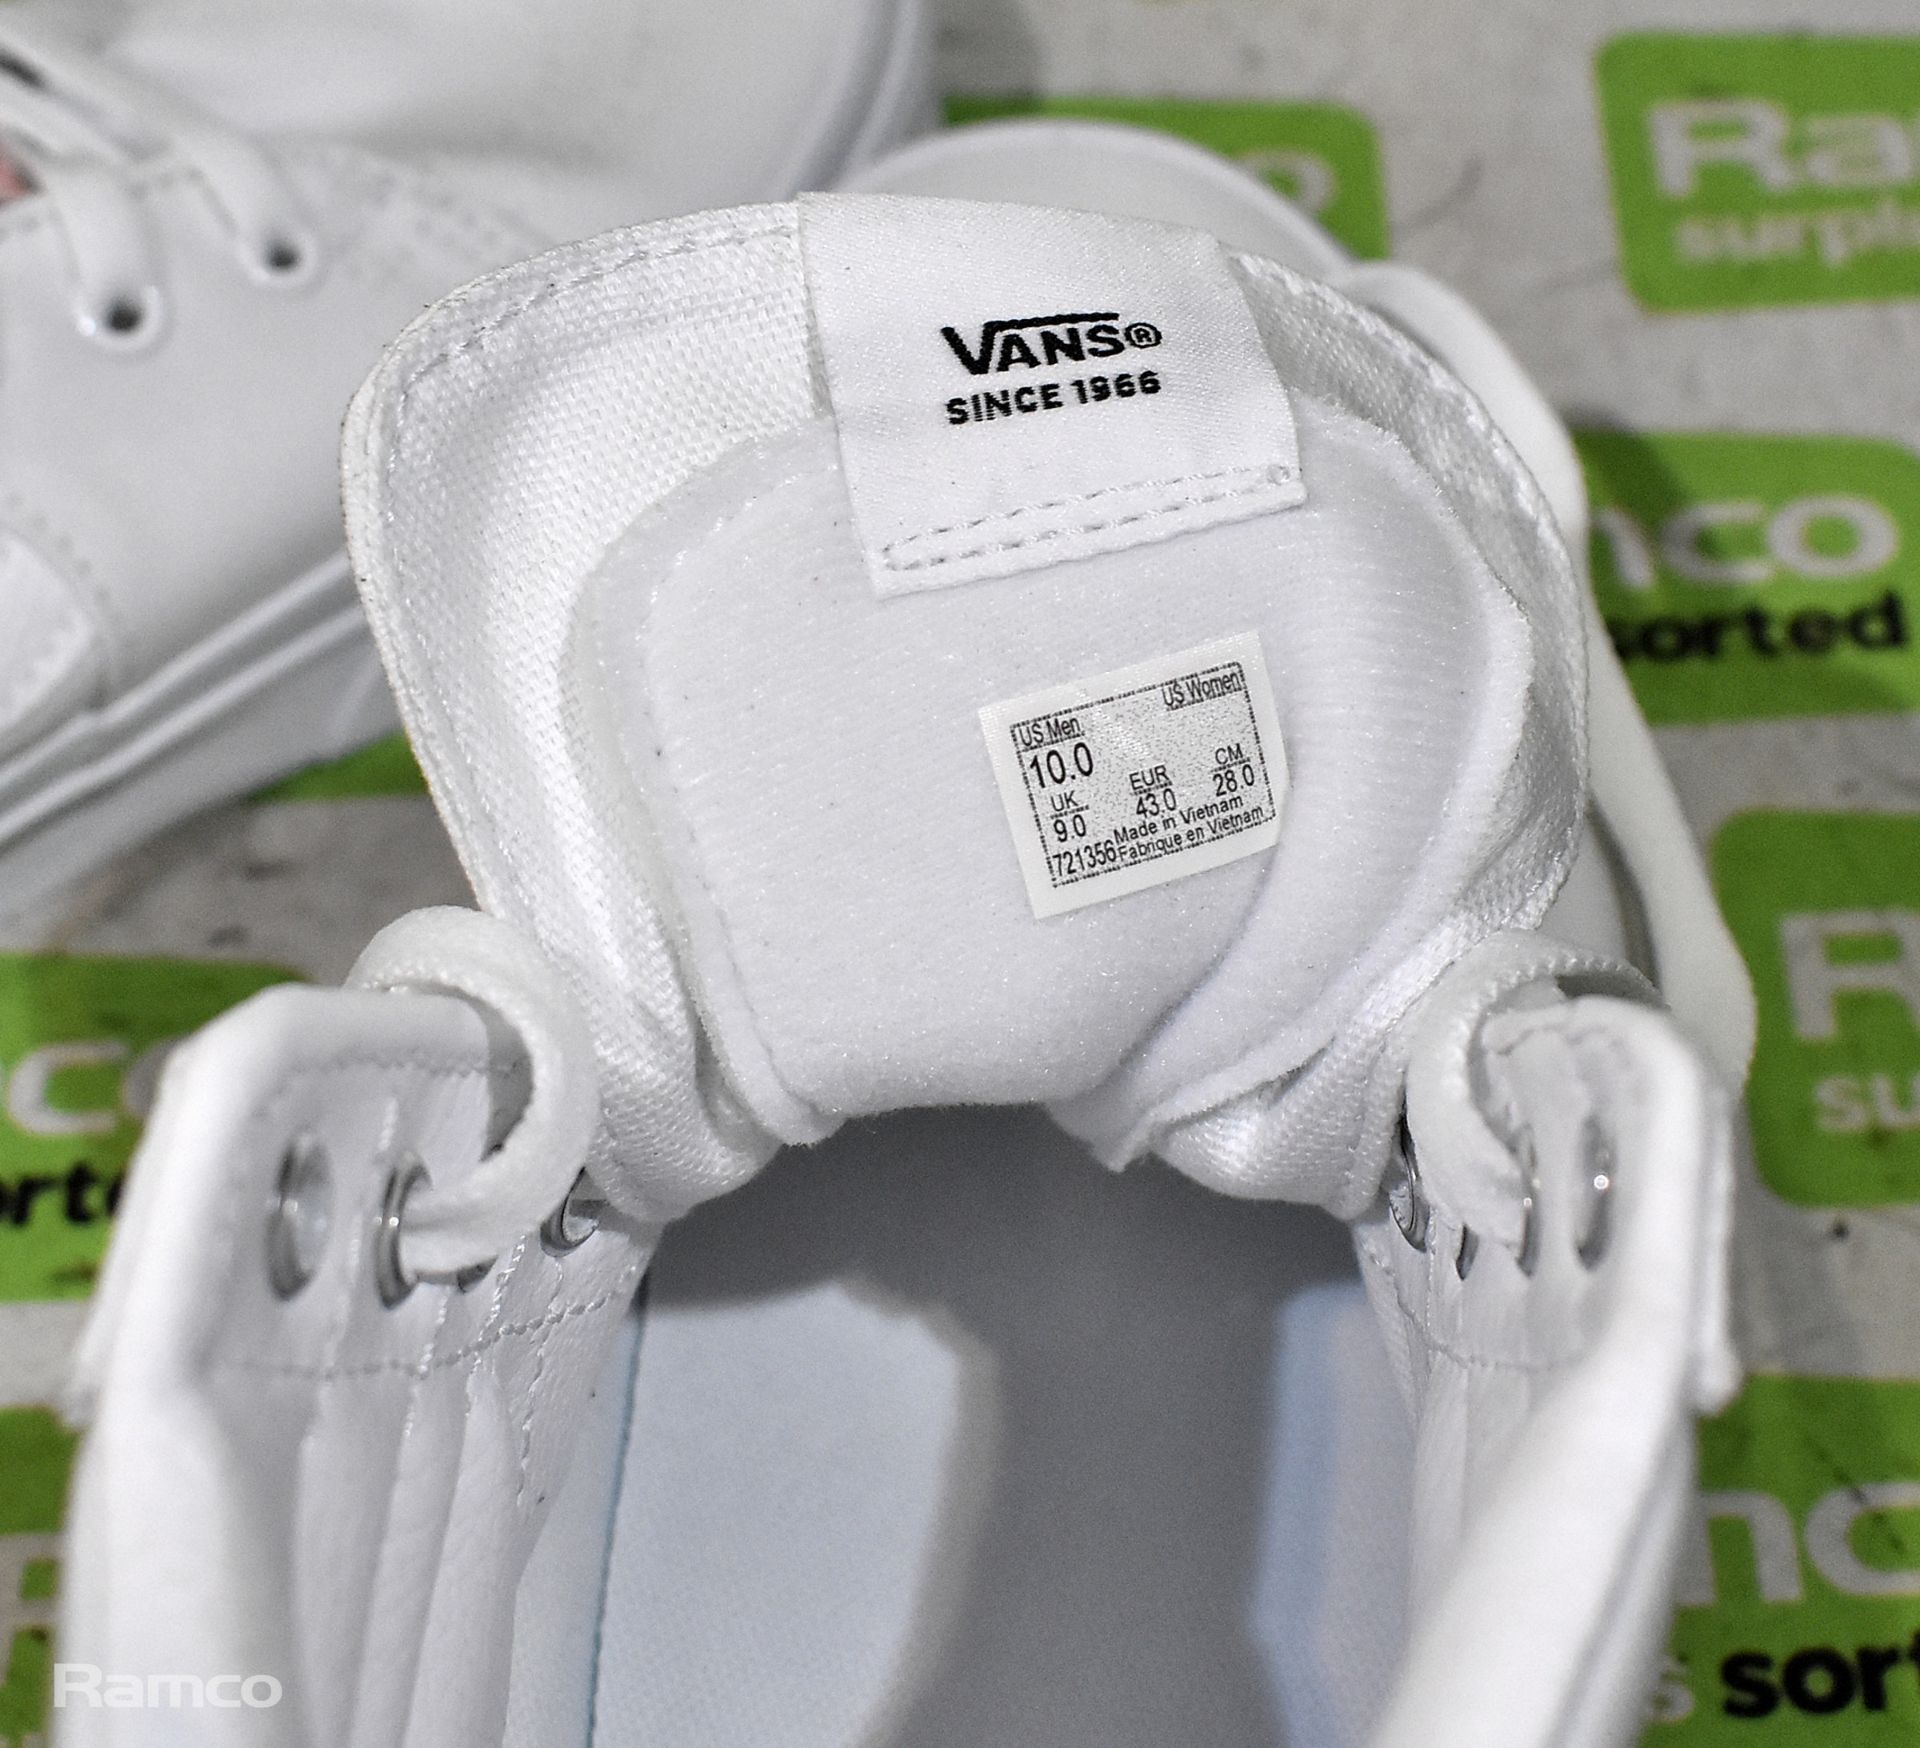 VANS Sk8-Hi white high top trainers - UK size 9 - not worn, still in box - Image 5 of 7